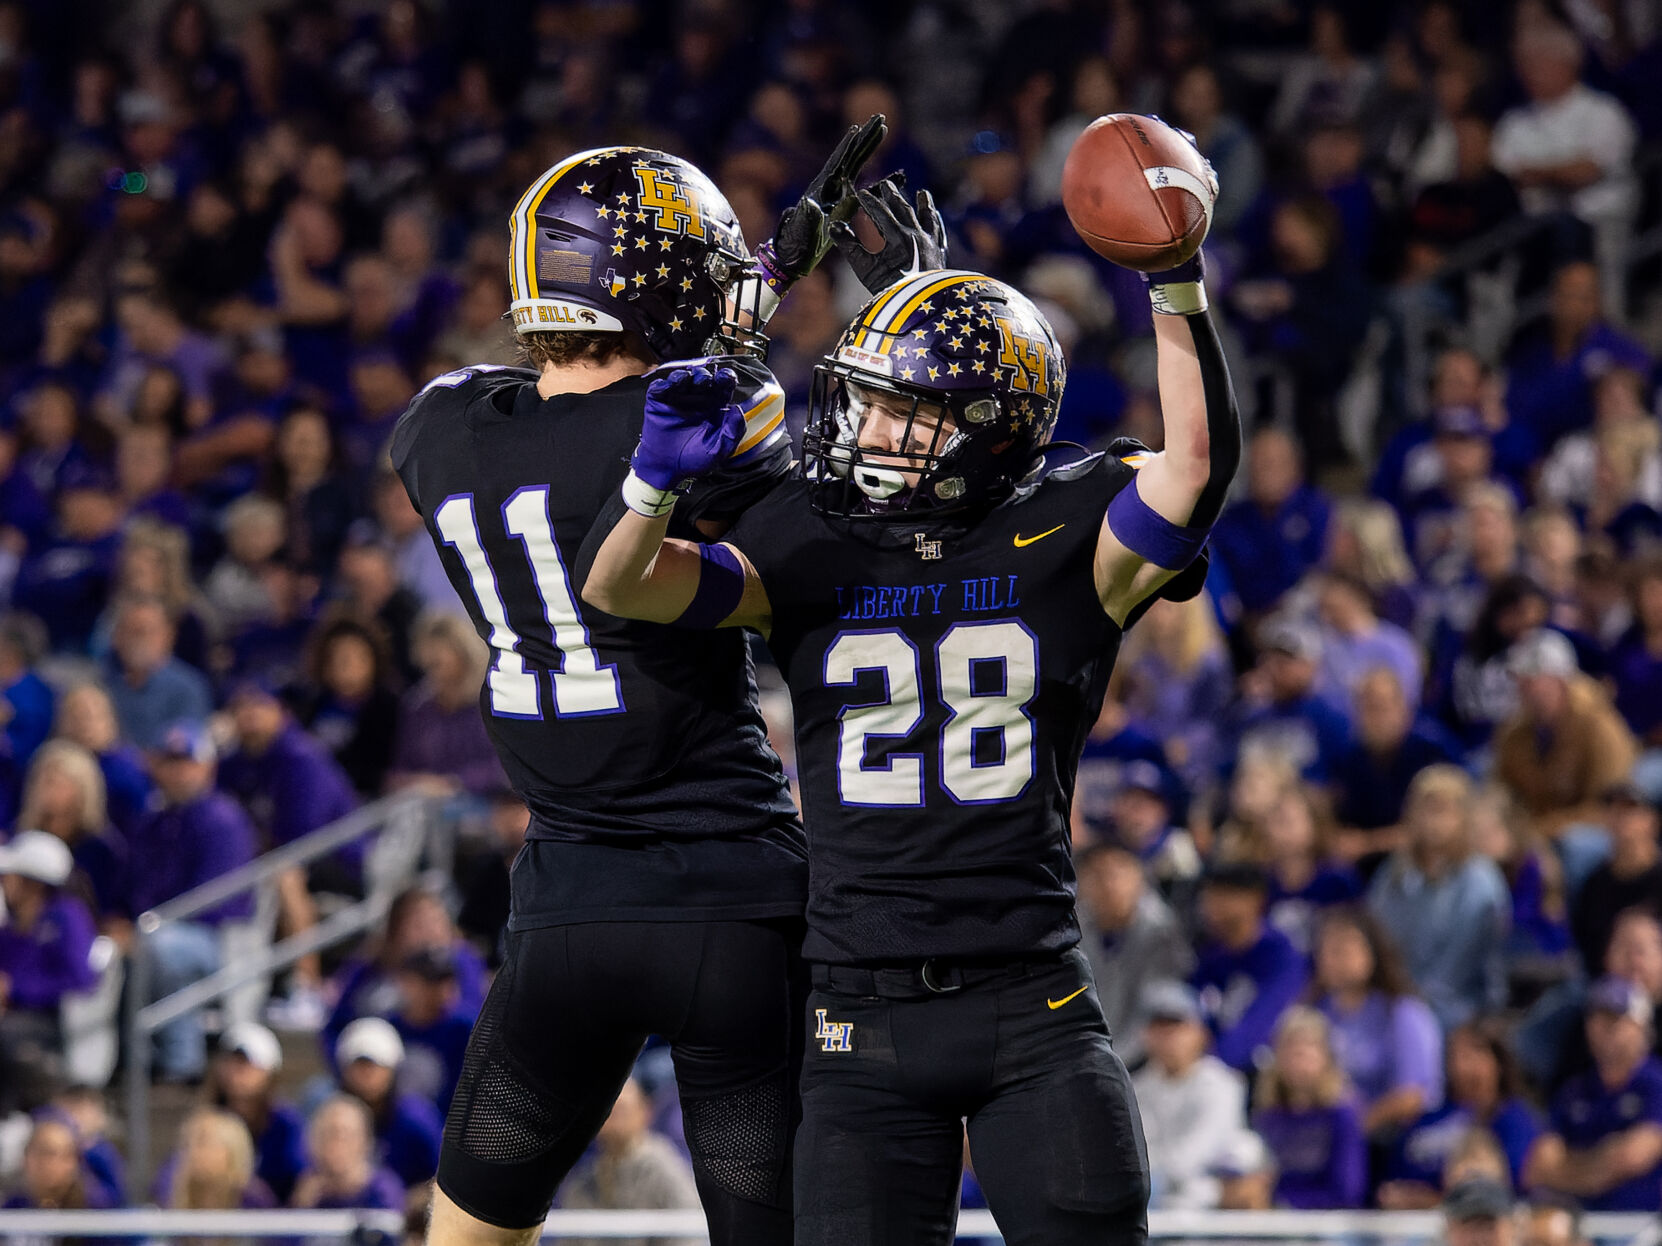 Liberty Hill Panthers fall to Port Neches-Groves Indians 42-35 in Class 5A Semifinals